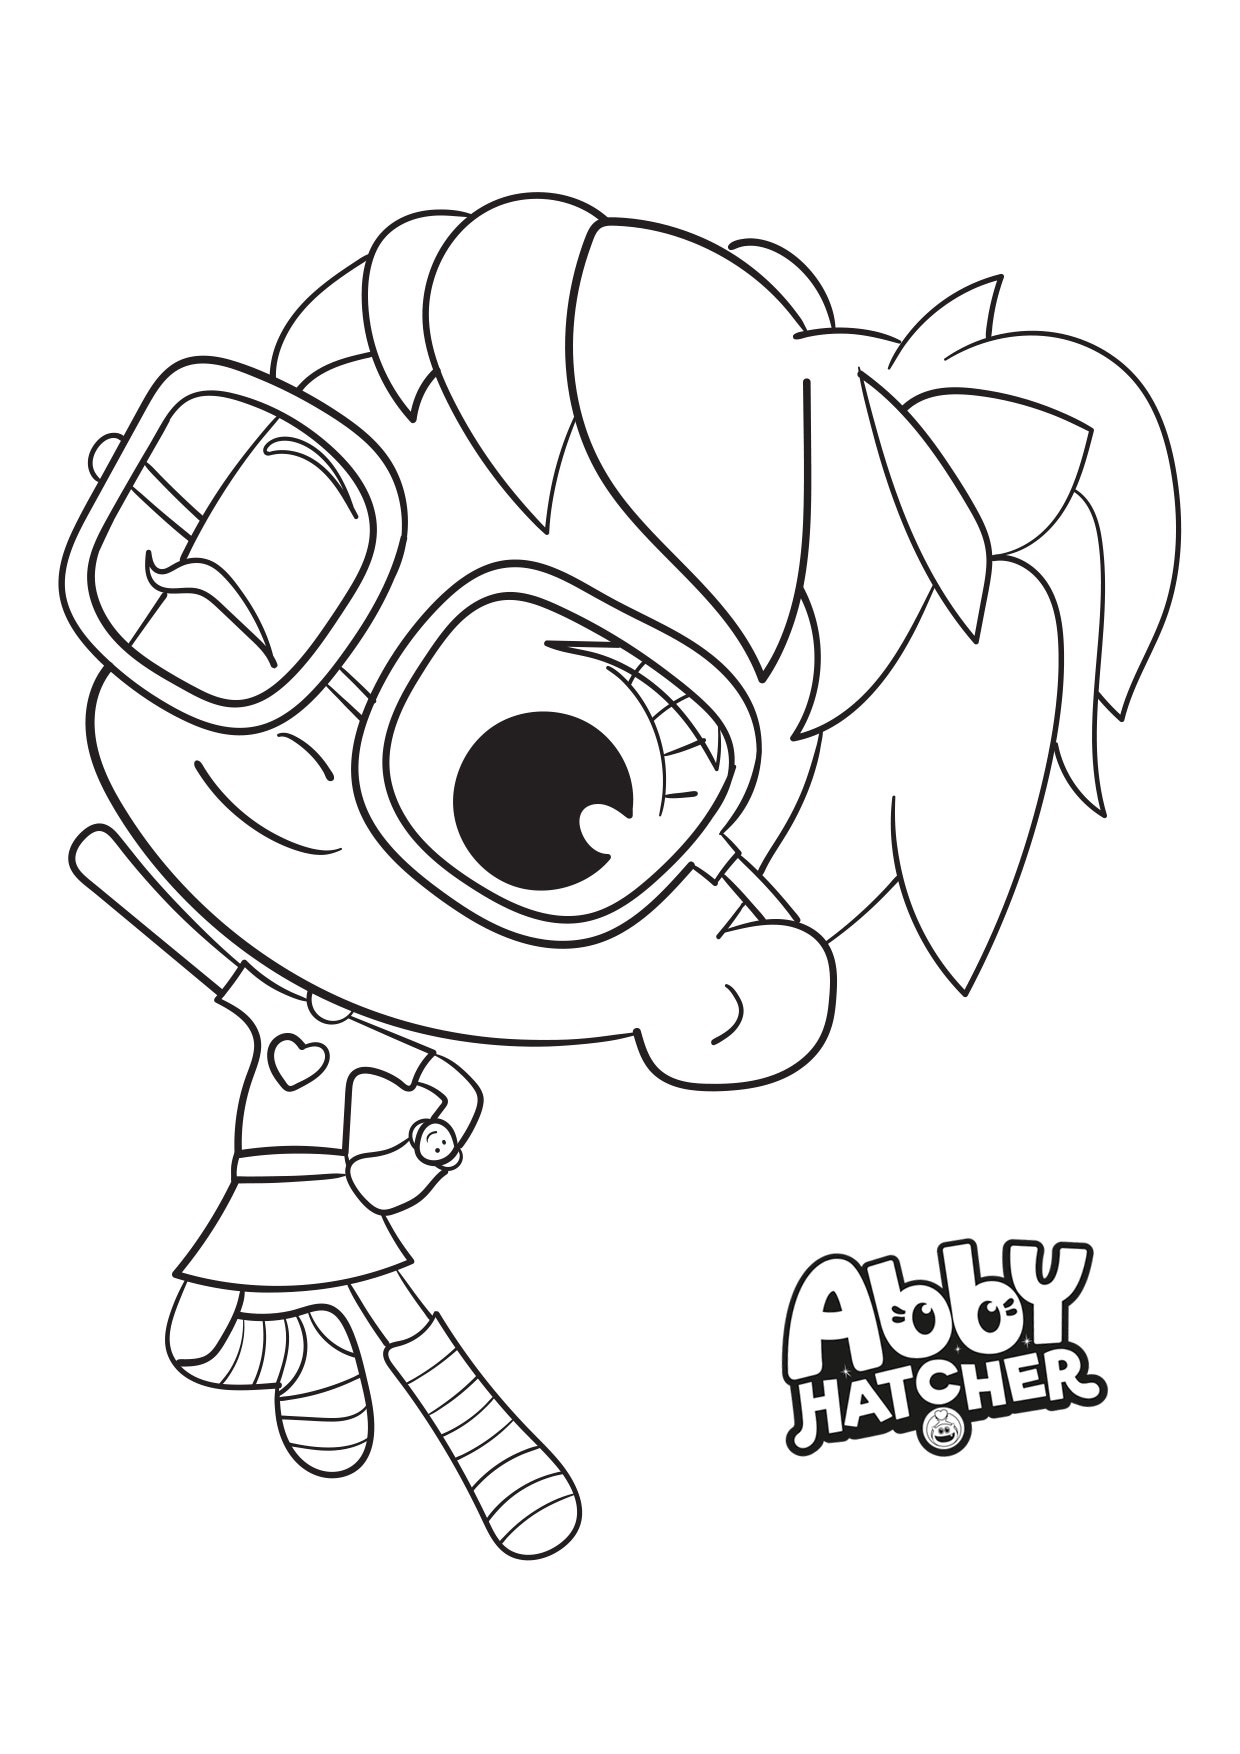 Abby Hatcher Jumping Coloring Page